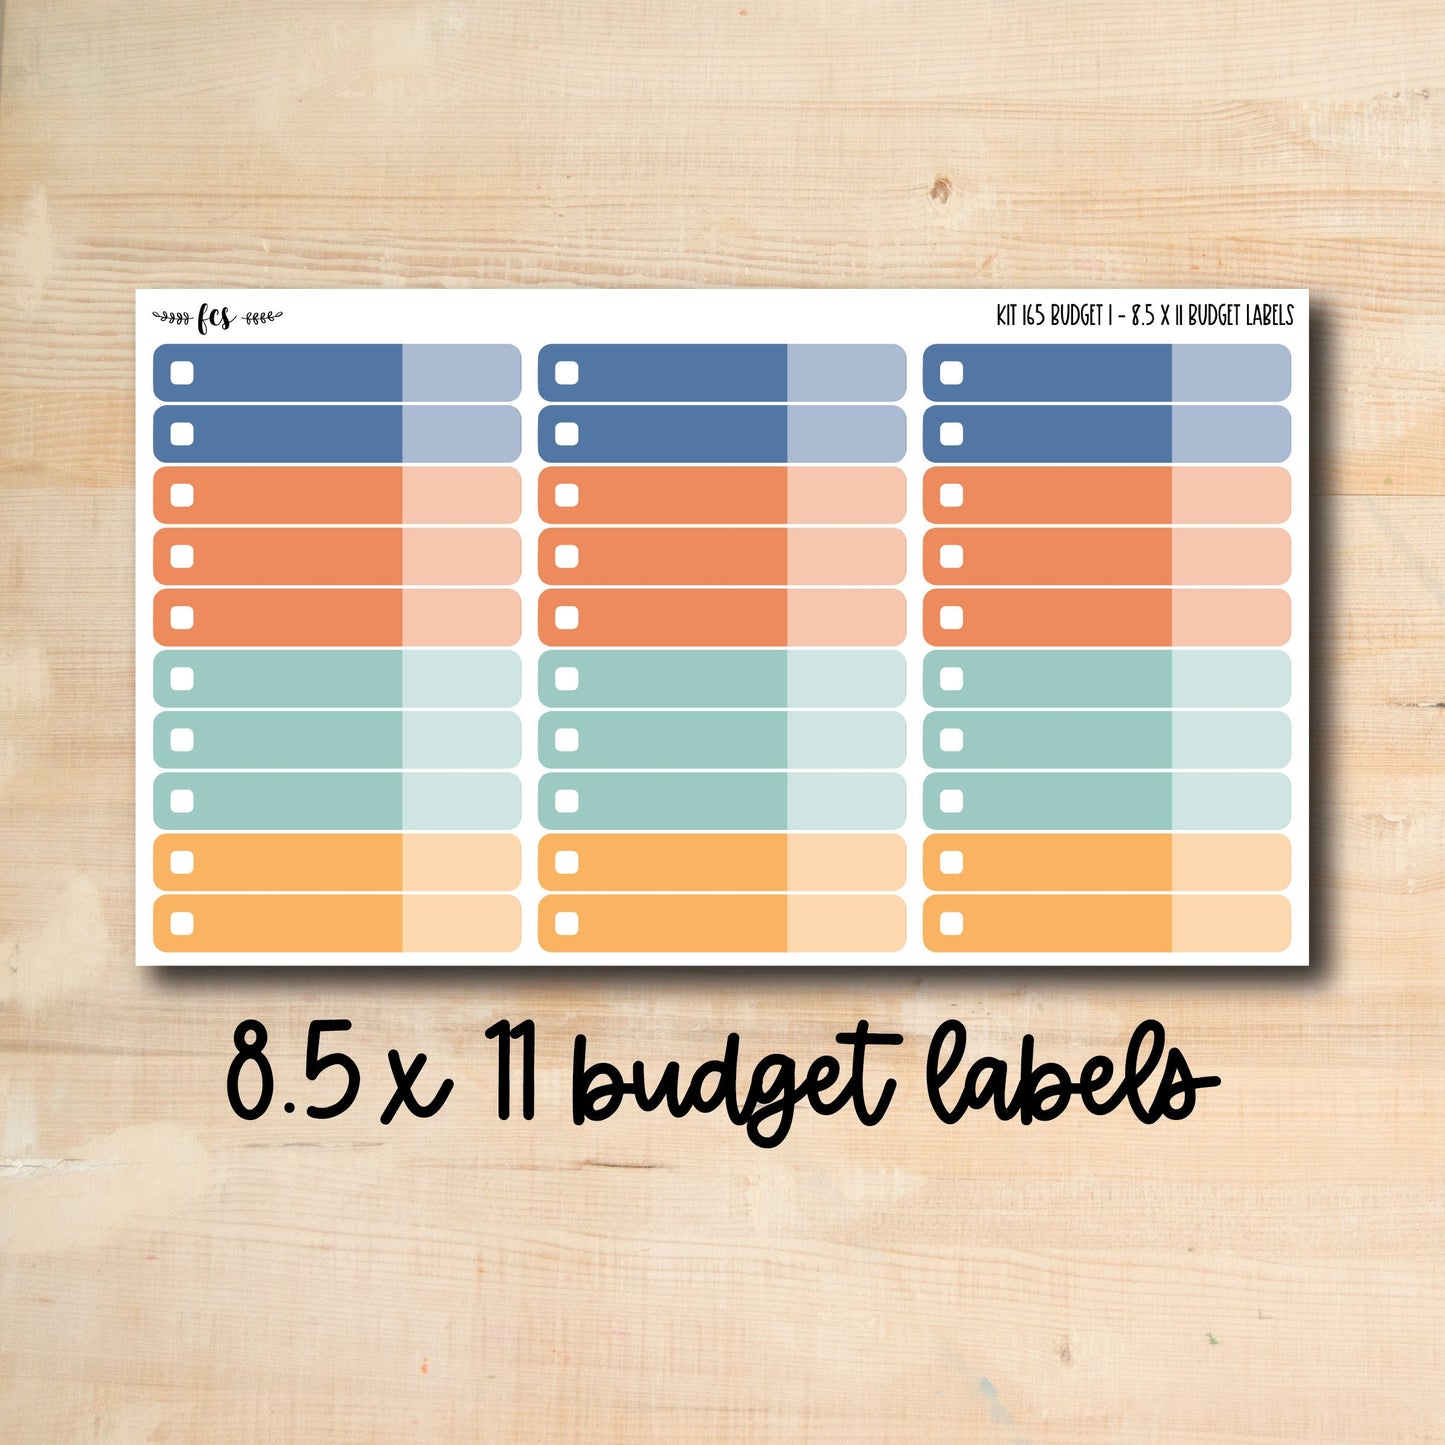 BUDGET-165 || BEAUTIFUL DAY 8.5x11 budget labels